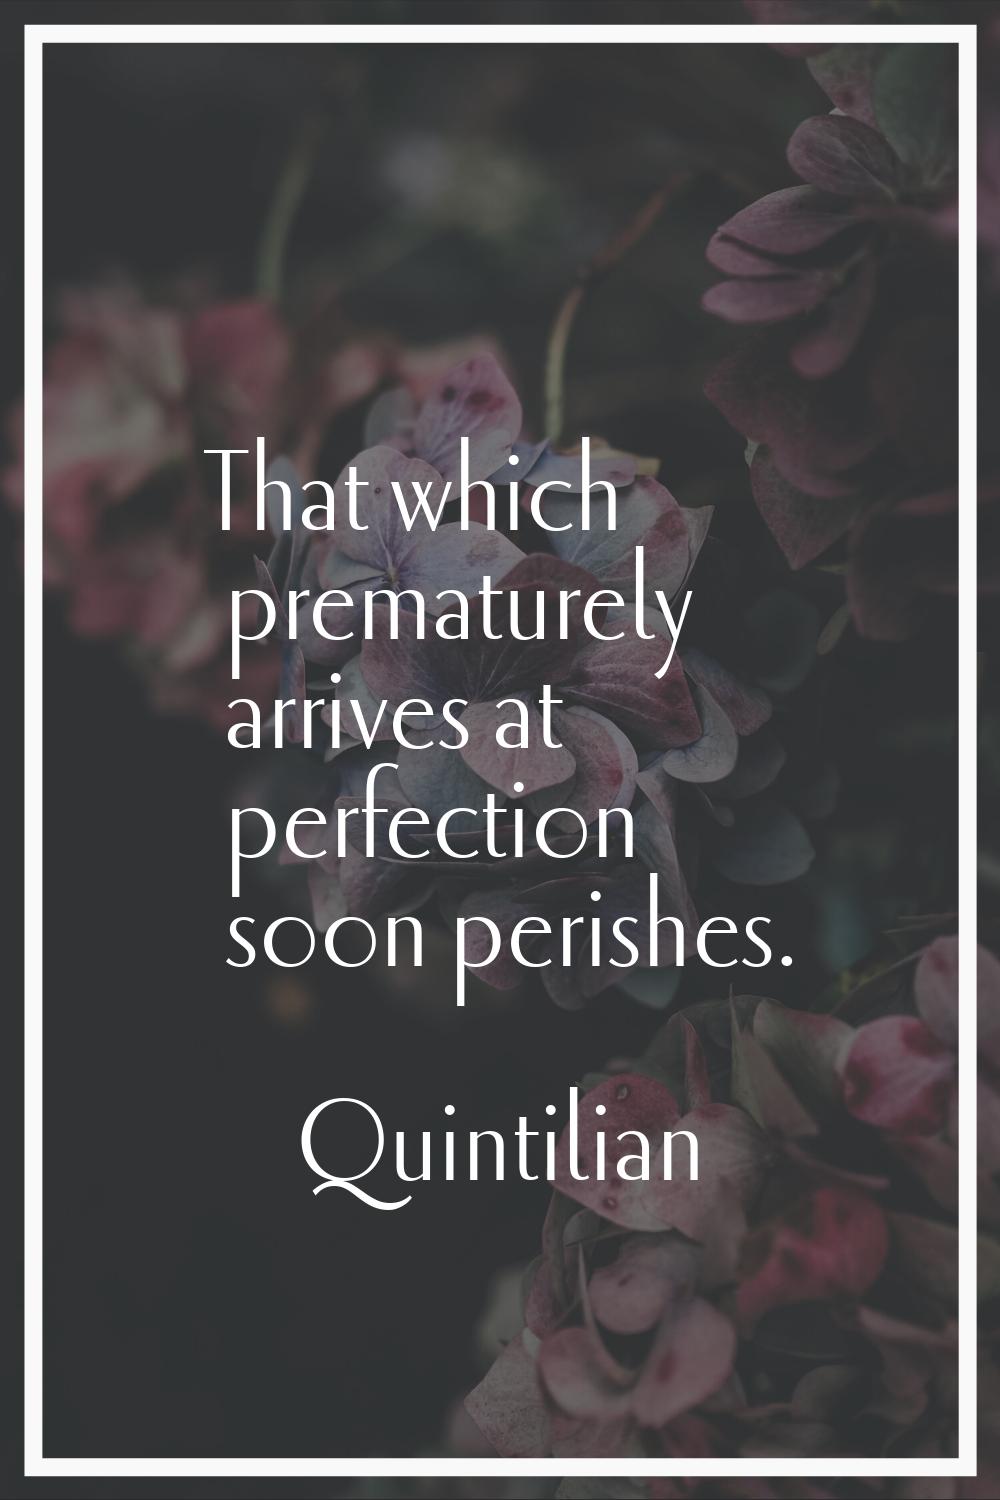 That which prematurely arrives at perfection soon perishes.